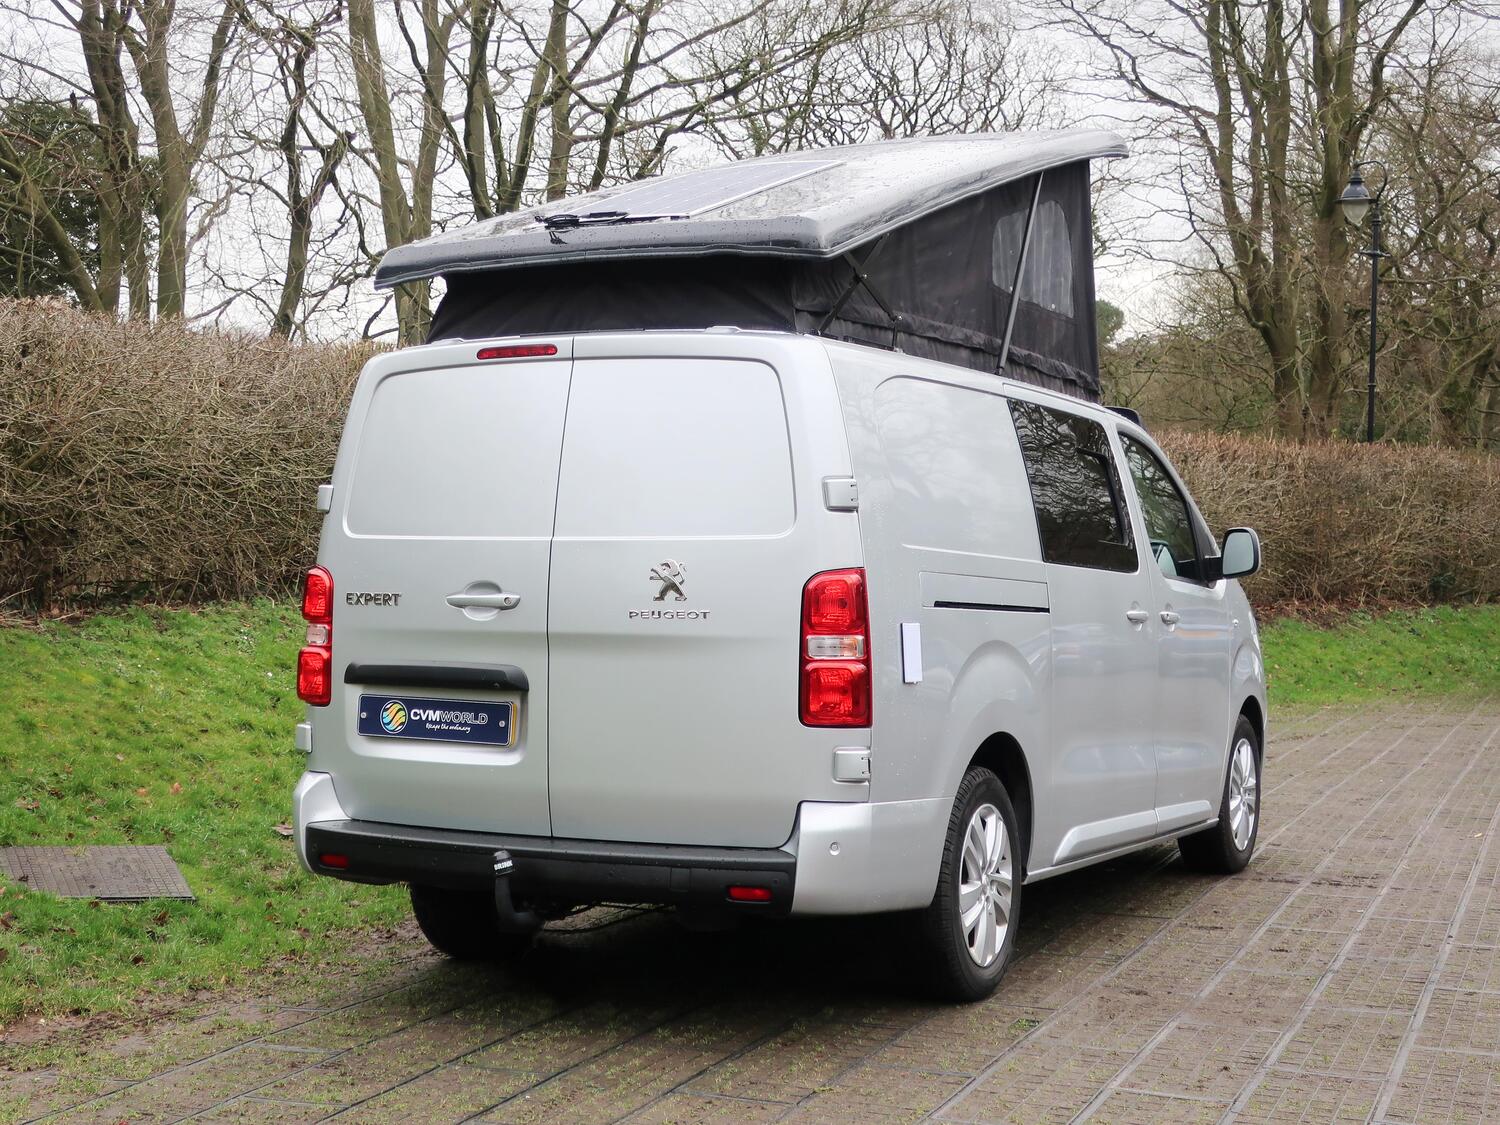 Peugeot-Expert-Long-Pro-4-BerthTravelling-Campervan-Rear Offside Angle with Pop Top Roof Open